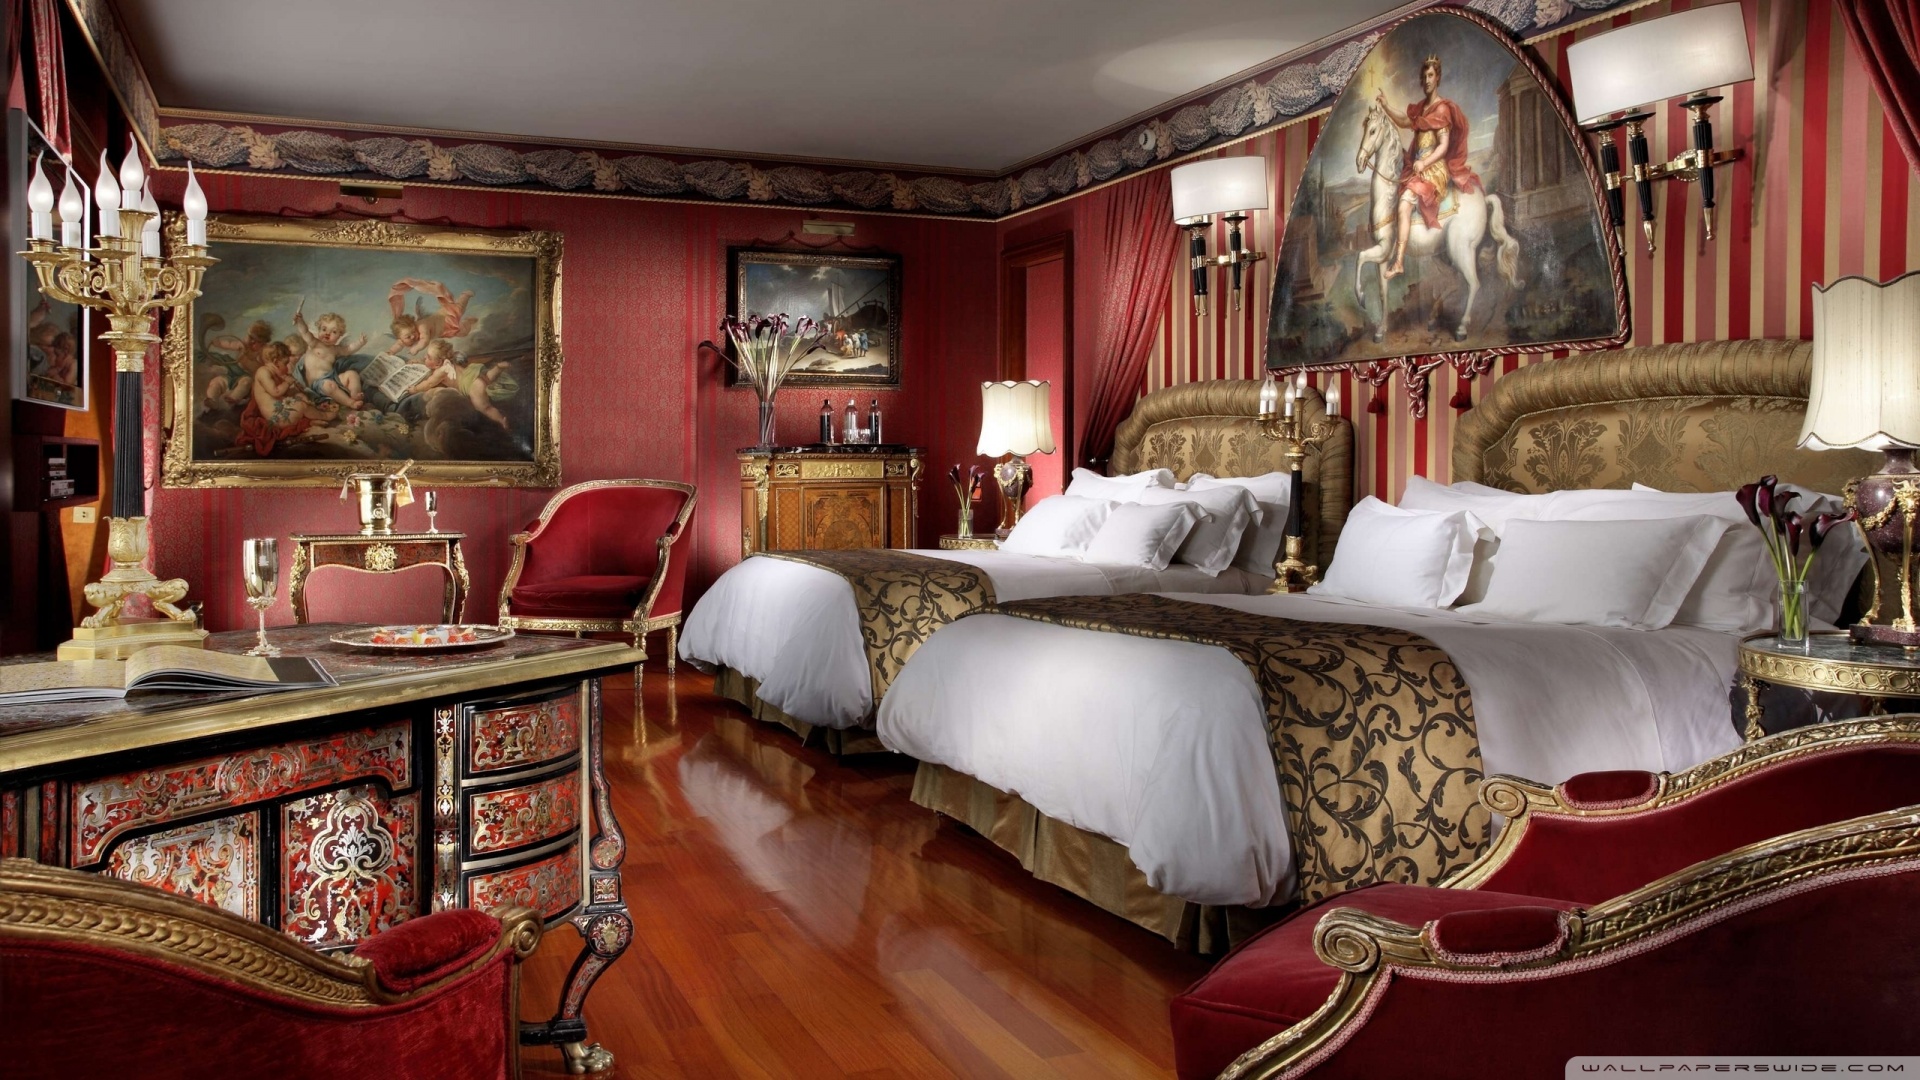 interior-design-of-royal-bedroom-picture-BXGr - House Decor Picture